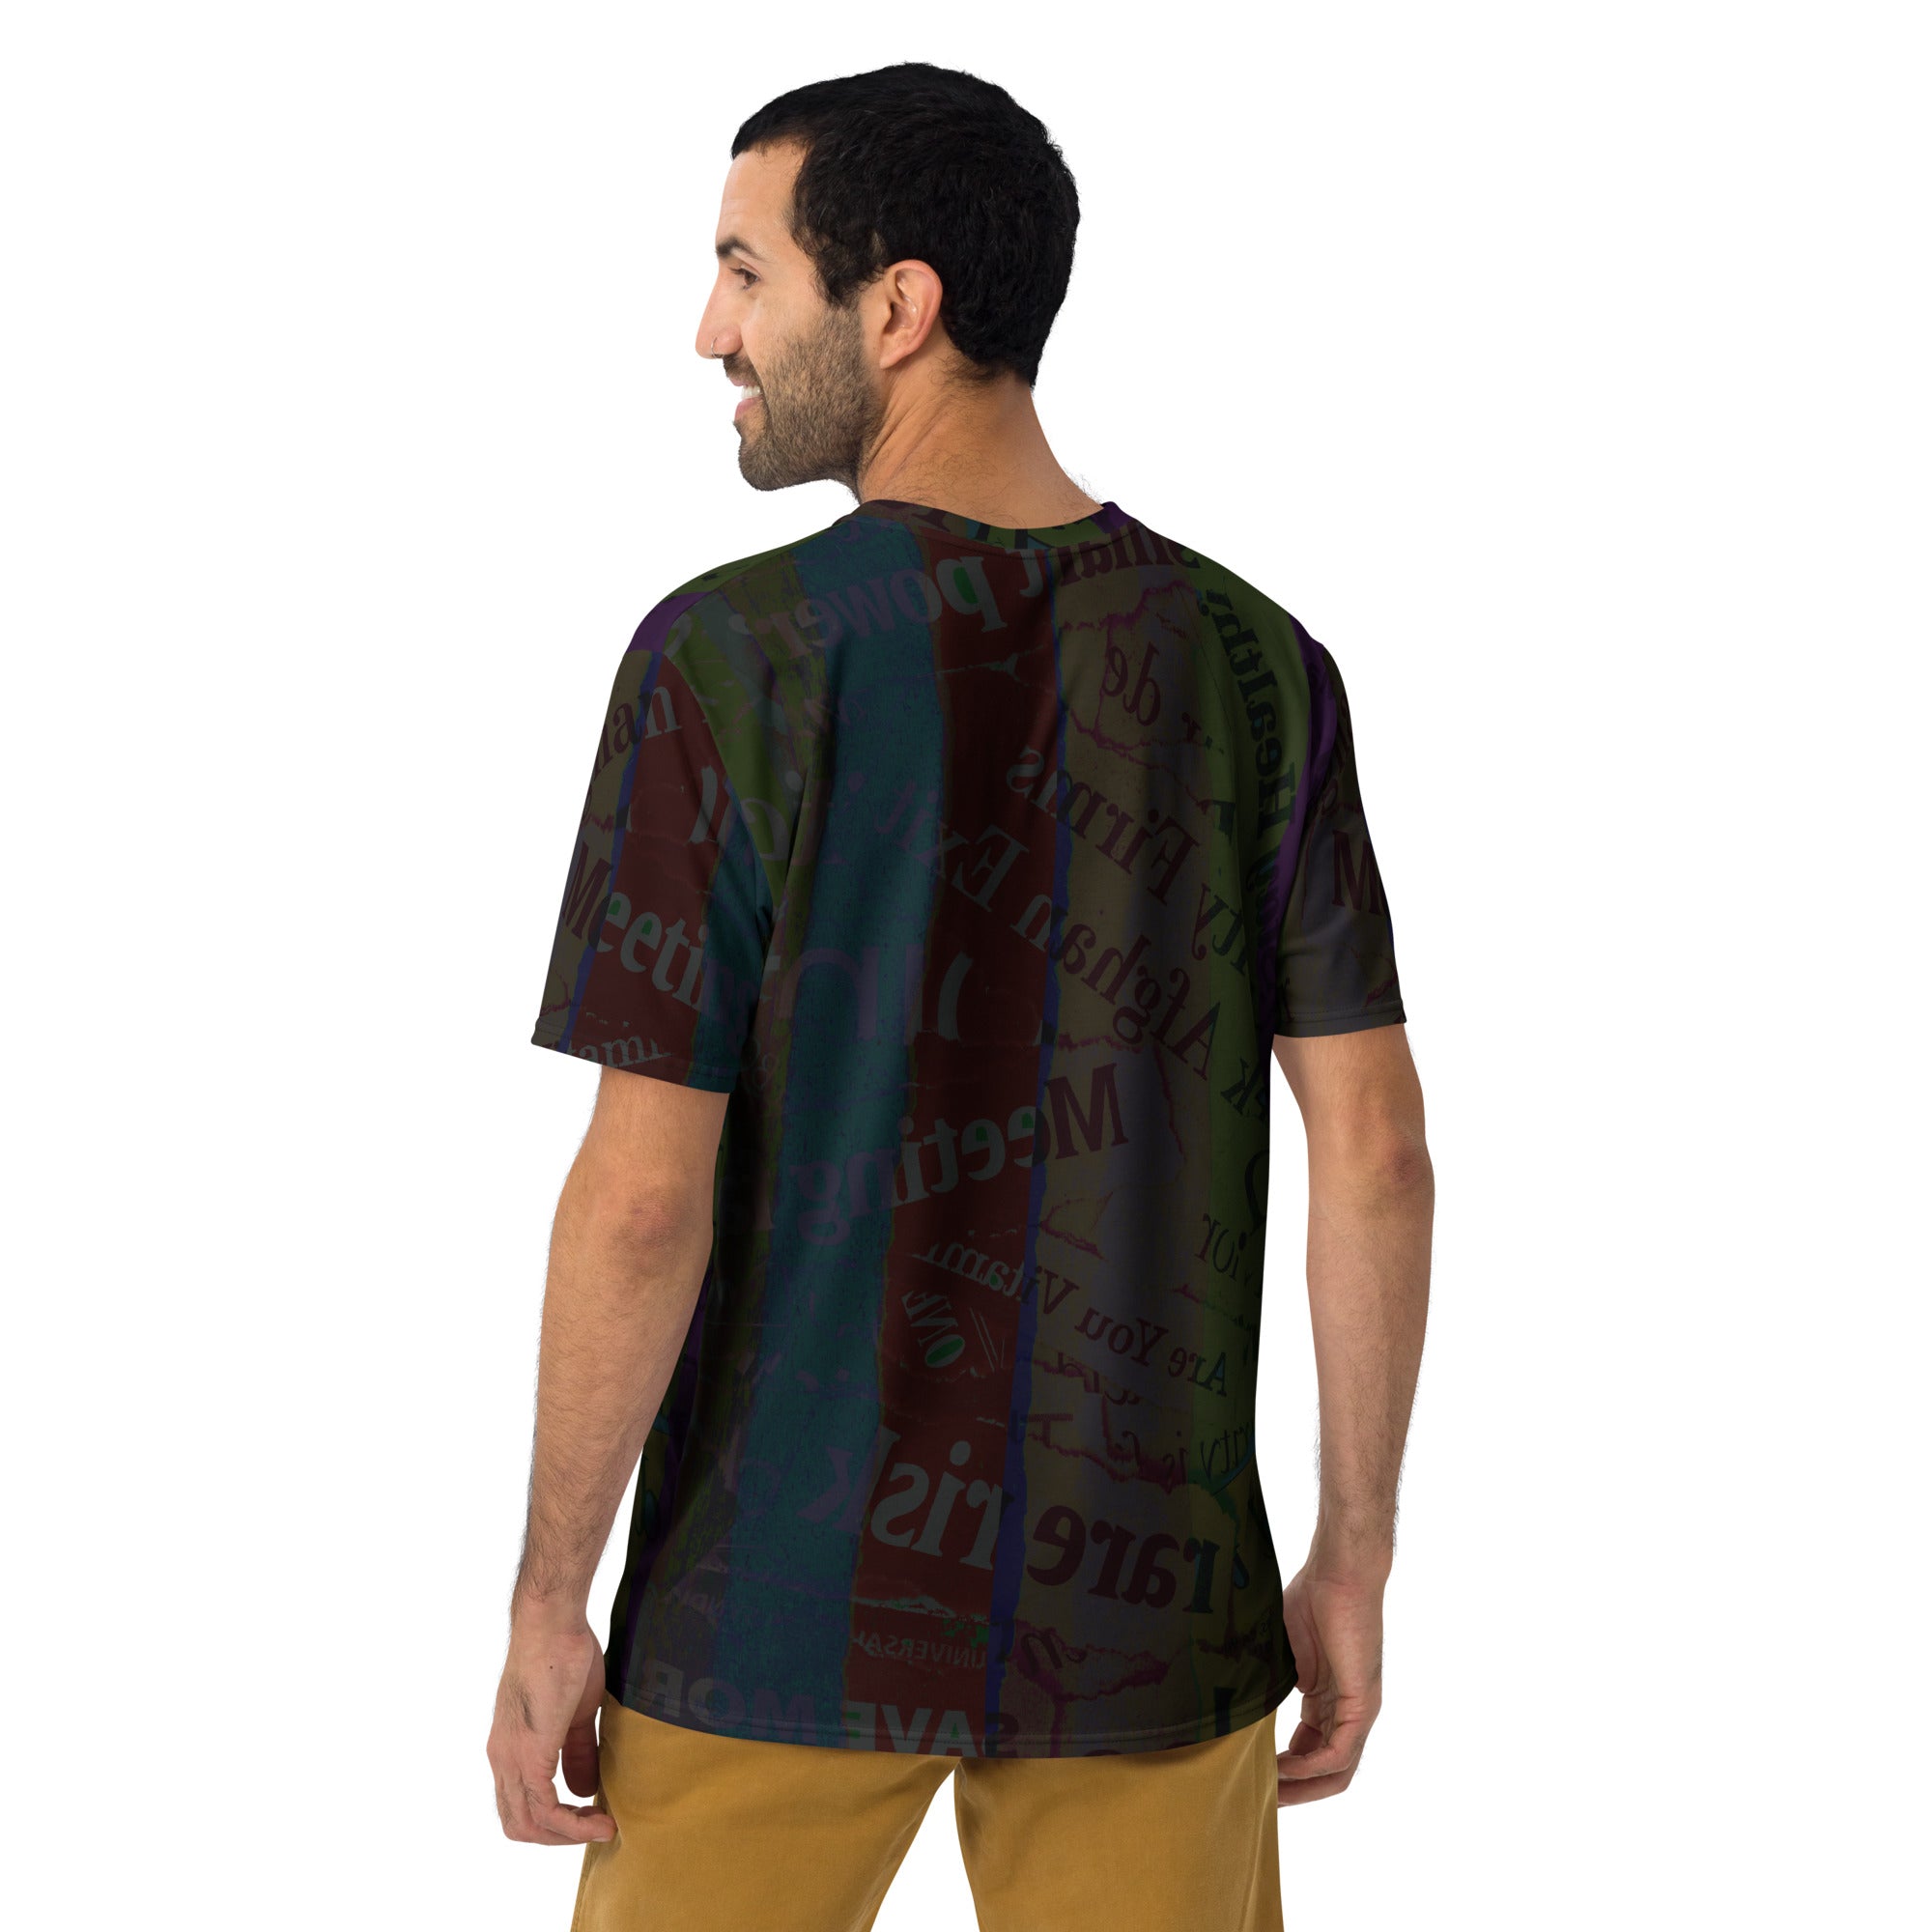 Man wearing Funky Fusion Crew Neck T-Shirt with colorful design.